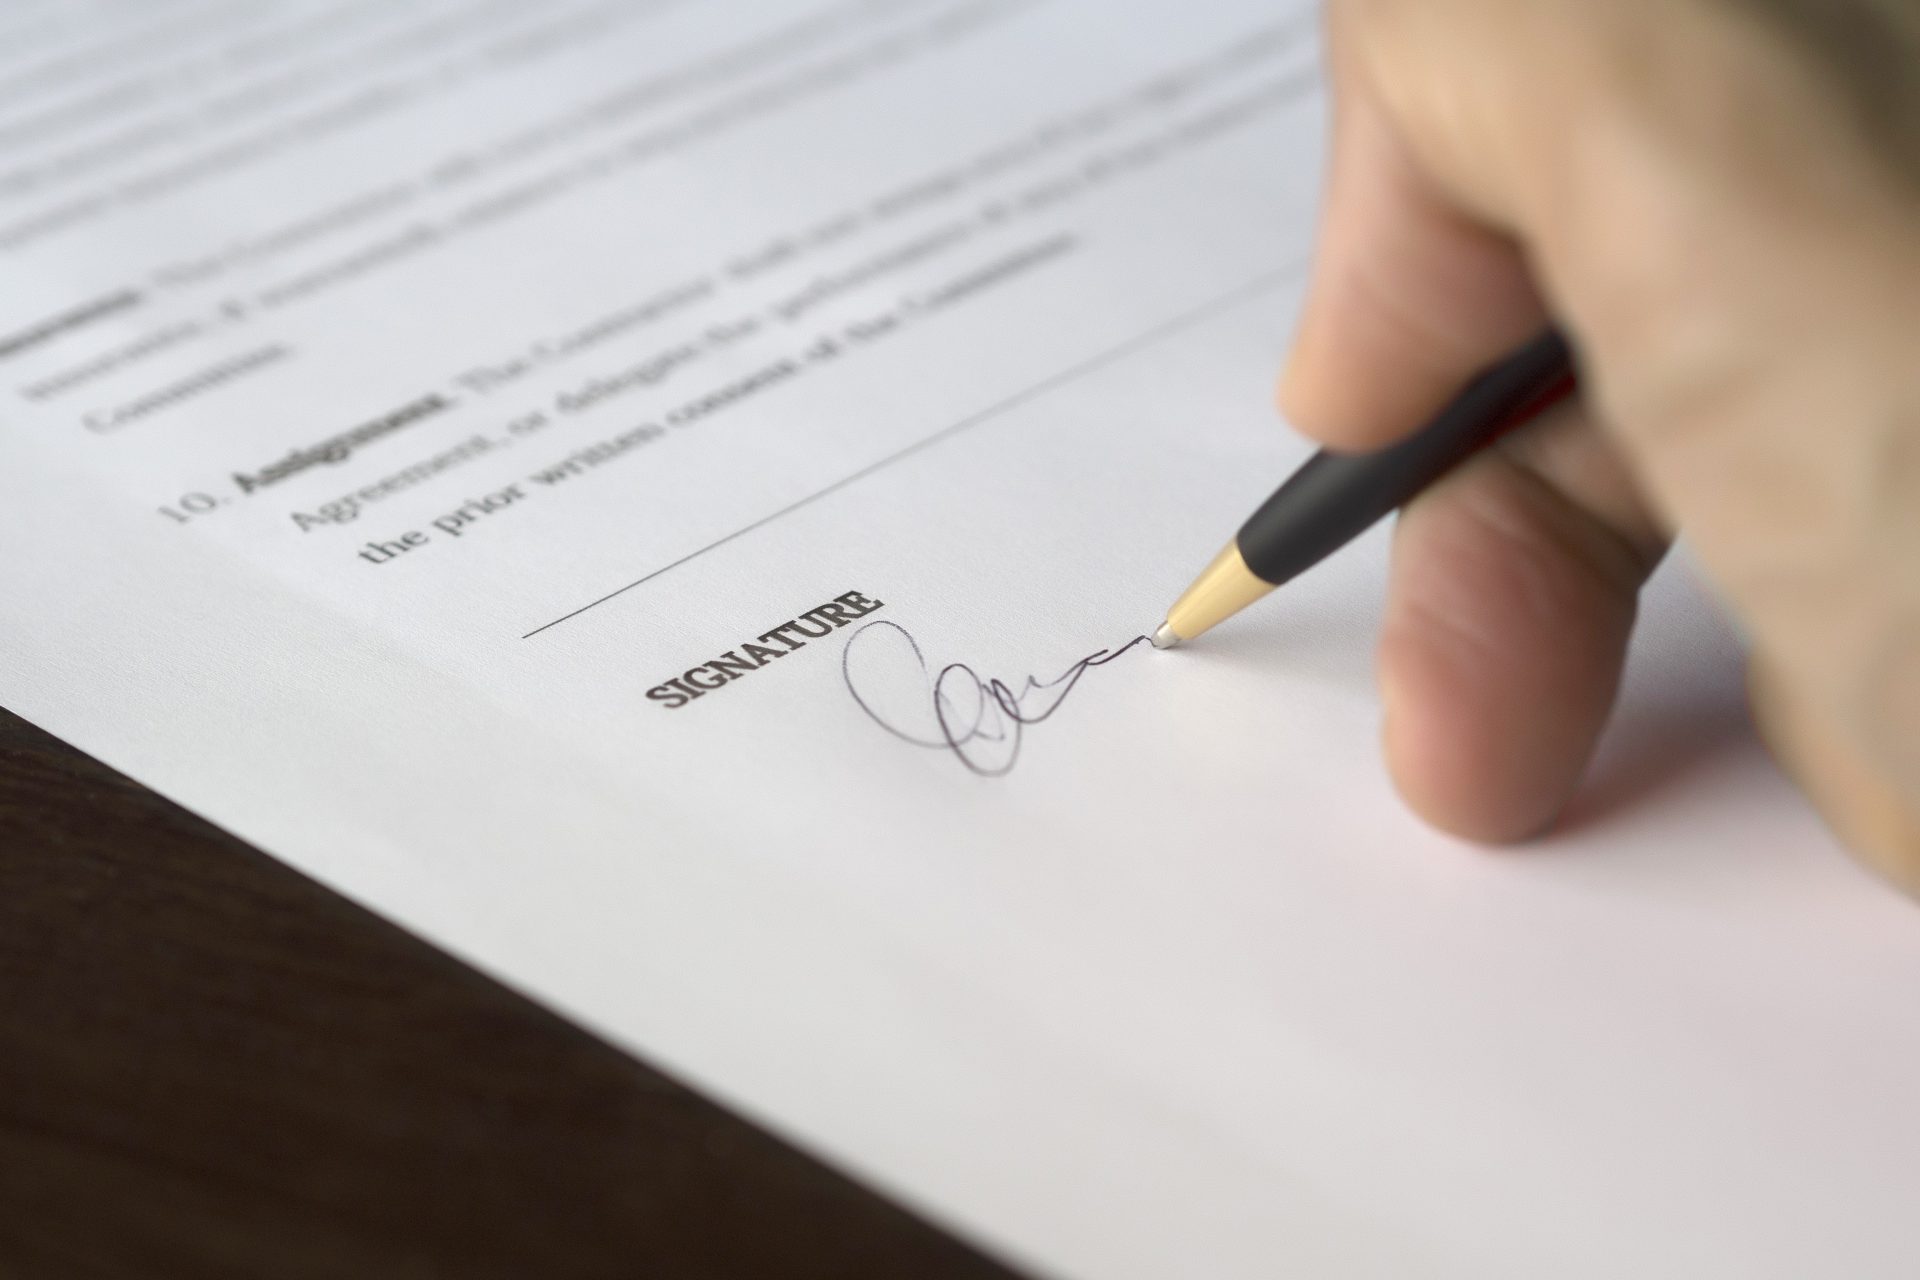 A close up photo of a hand holding a pen writing a signature on a contract